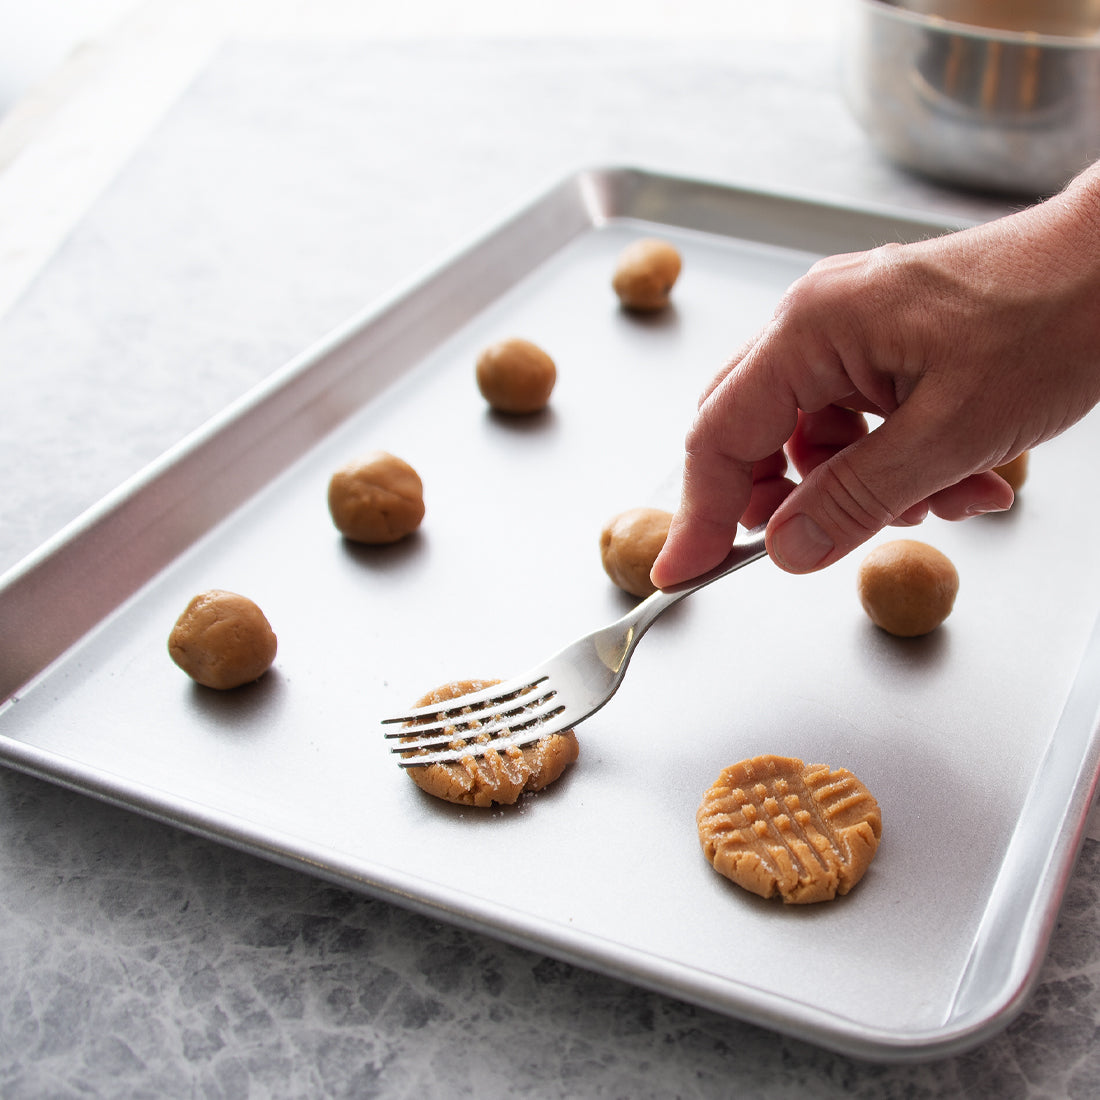 Cookie Baking Sheets